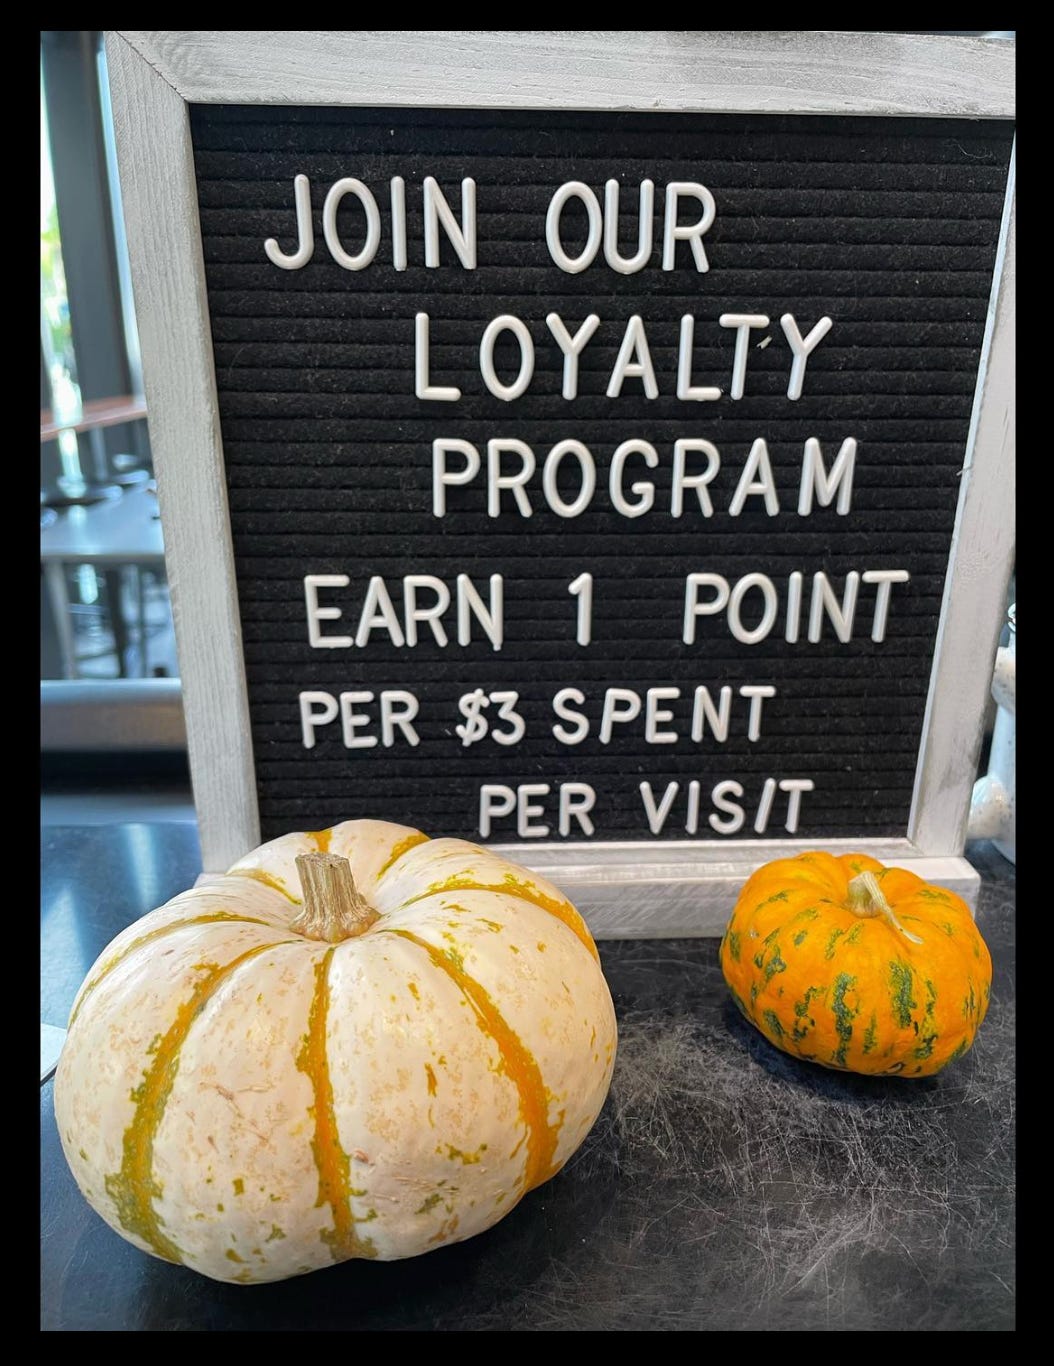 A pegboard menu sign advertising a loyalty program at a coffee shop. Two decorative pumpkins prop up the sign.